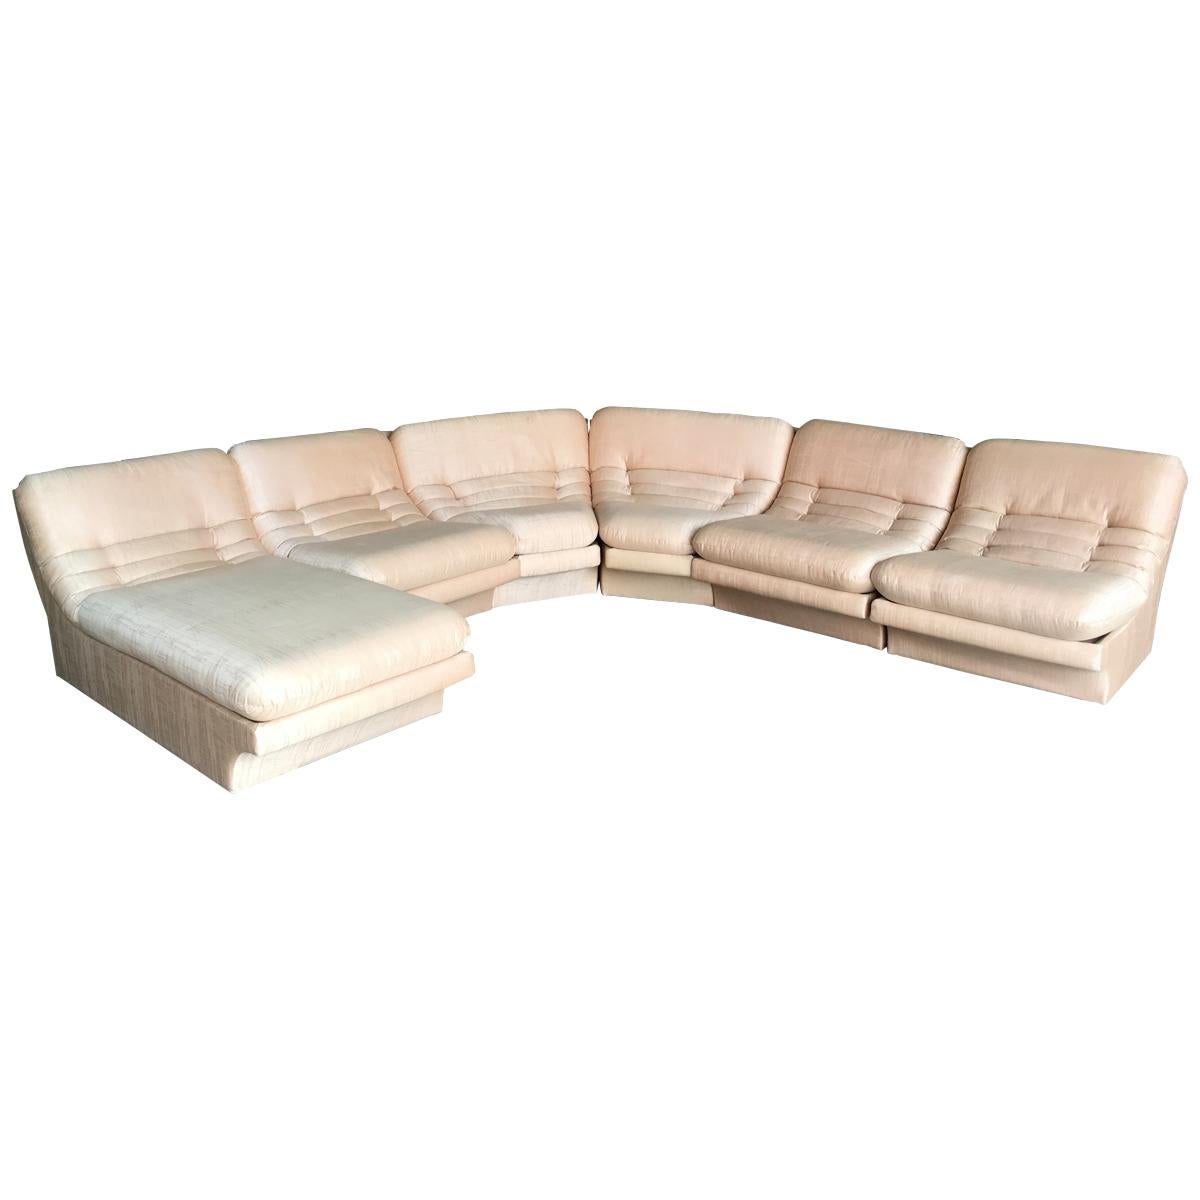 Carson's Six Piece Midcentury Sectional with Lounge Chaise